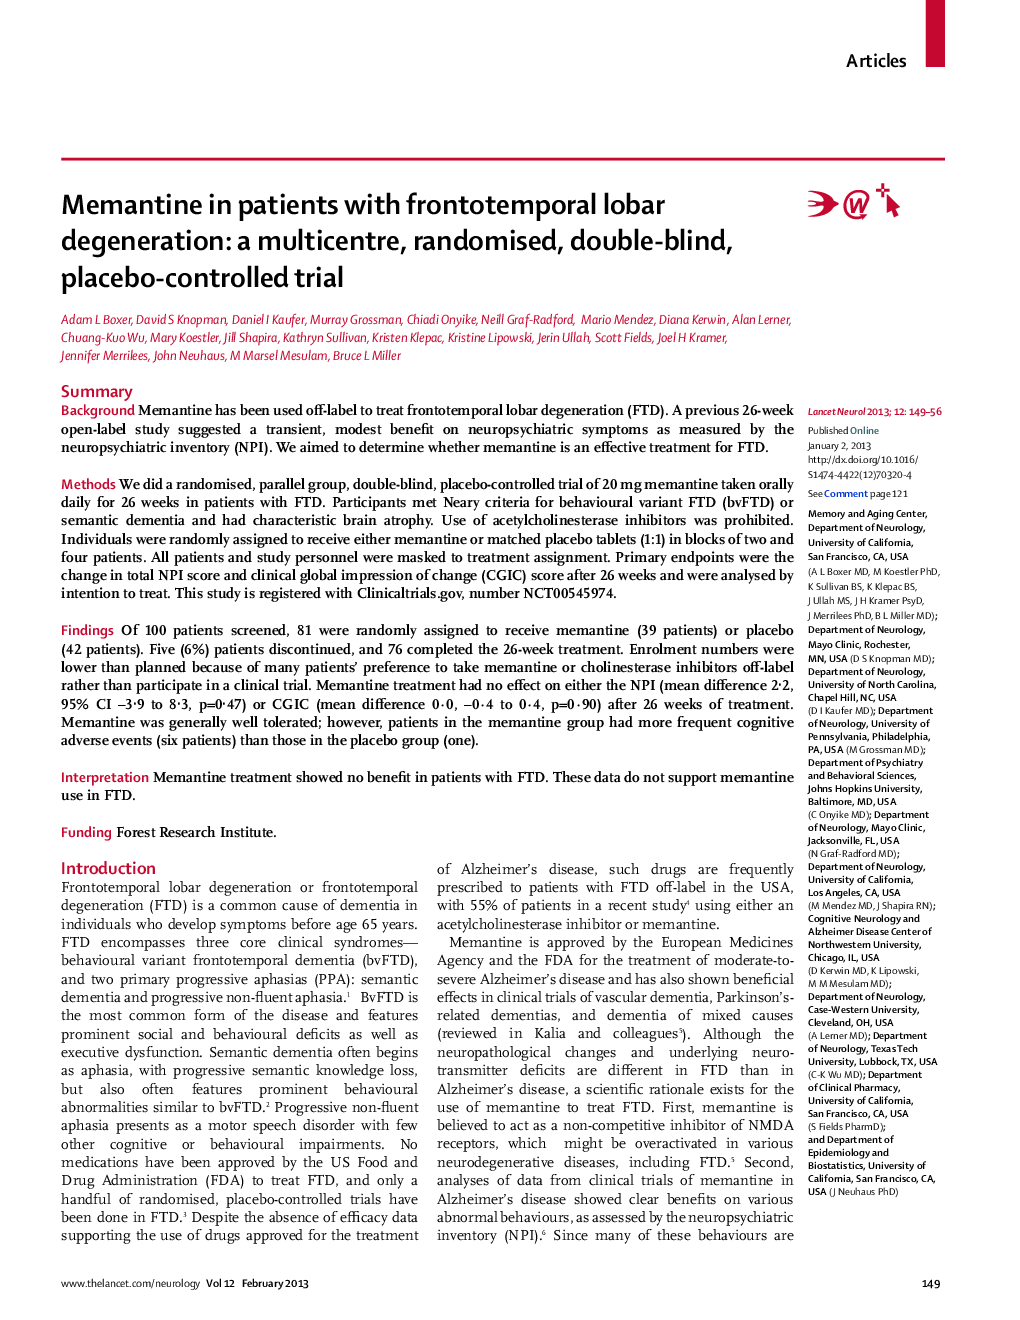 Memantine in patients with frontotemporal lobar degeneration: a multicentre, randomised, double-blind, placebo-controlled trial